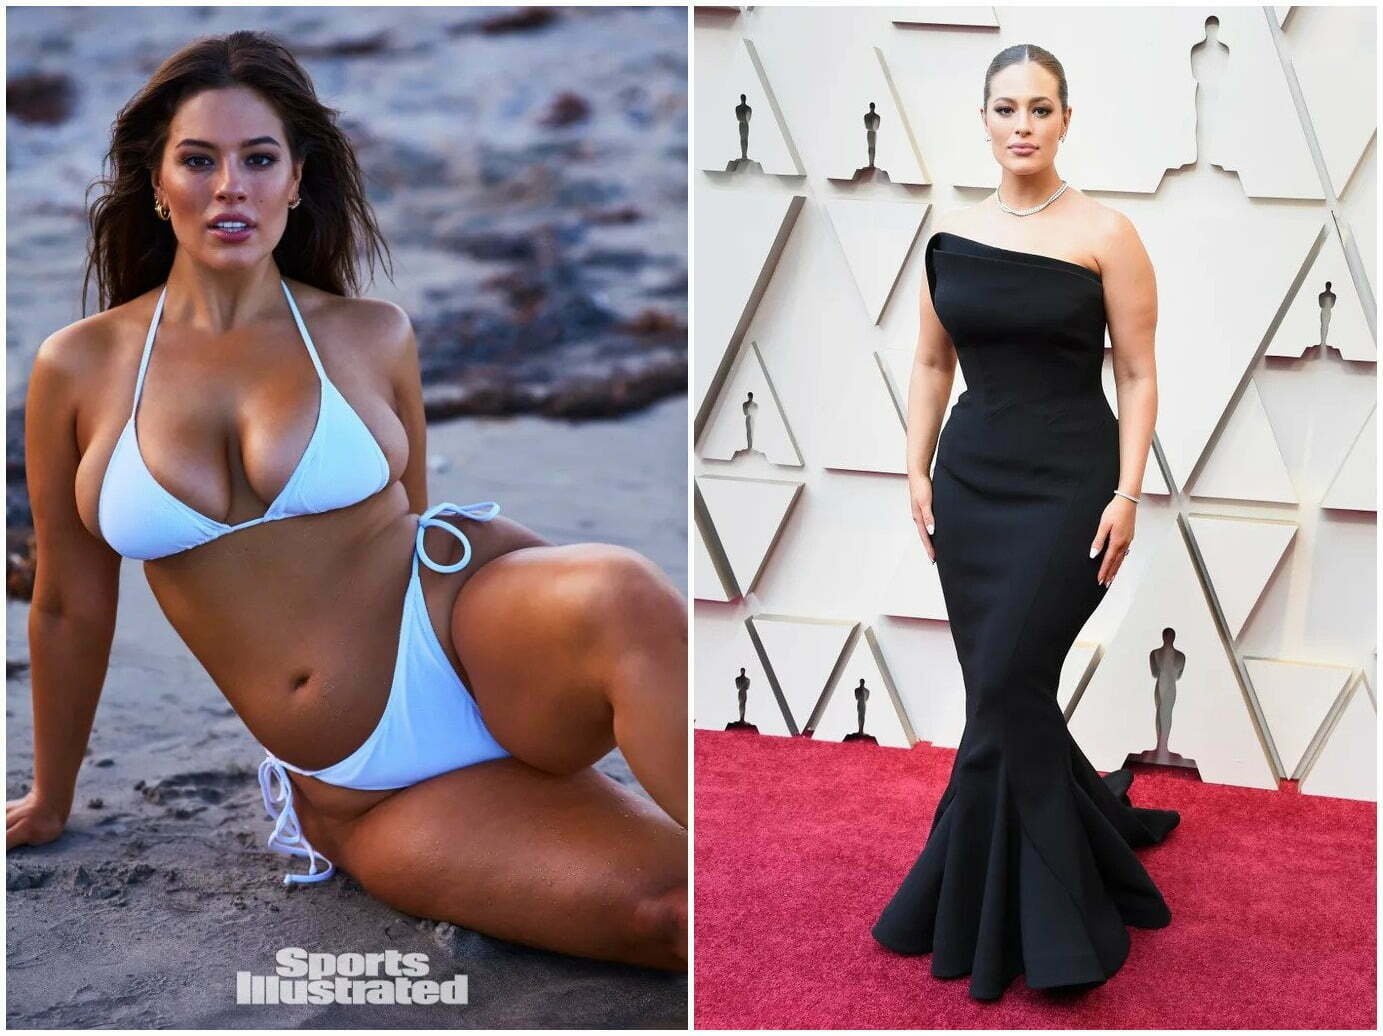 Ashley Graham's Rise To Fame: A Look At Her Career & Achievements